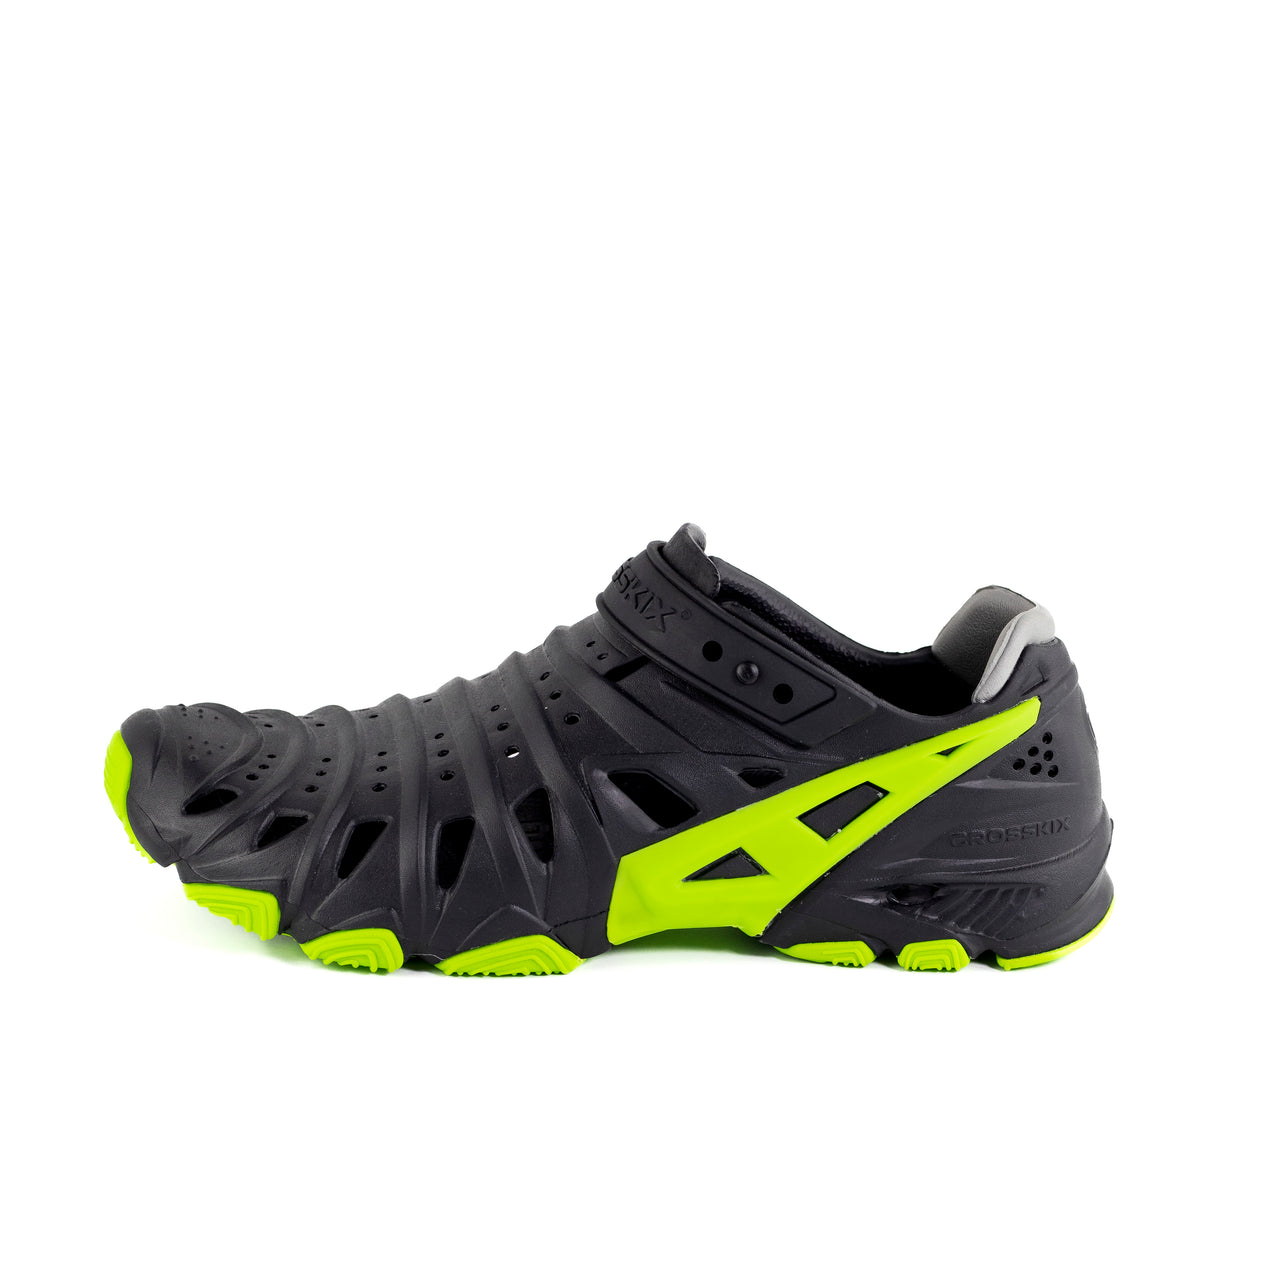 2.0 Closed Toe Water Shoes for Men